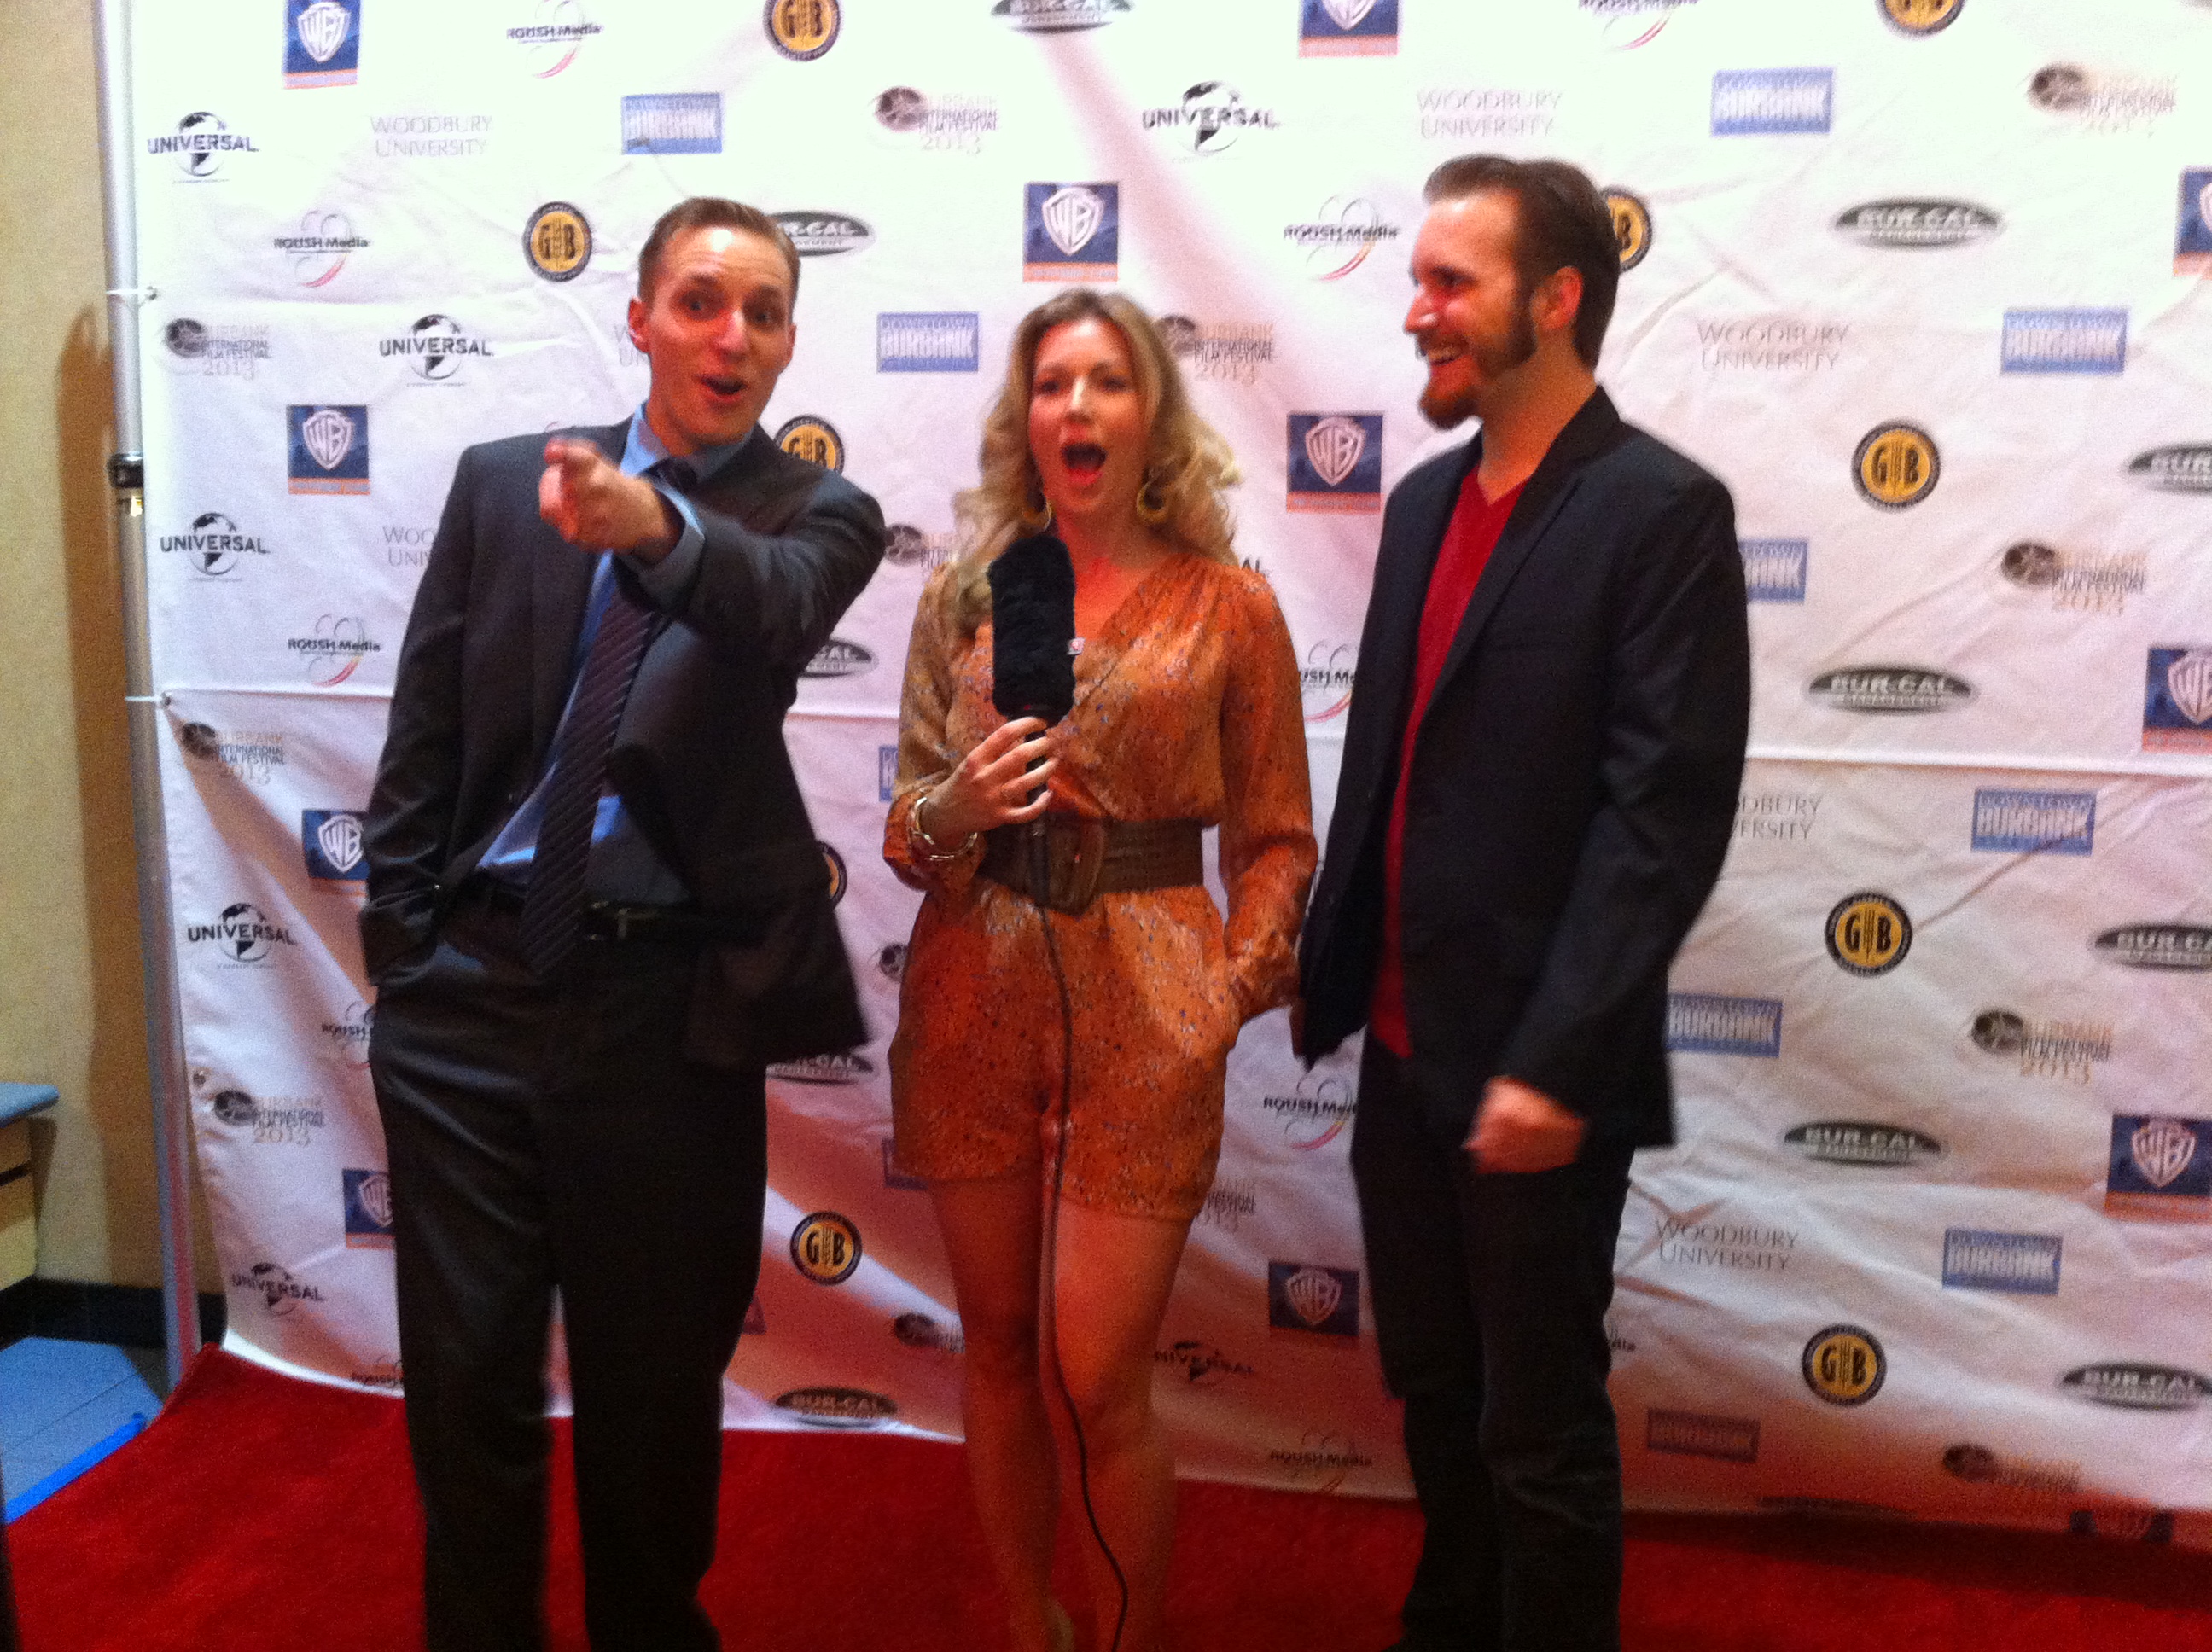 Jon Kondelik and James Kondelik on the red carpet of the A House is Not A Home theatrical premiere. Film won Best Horror Feature Film at the Burbank International Film Festival 2013